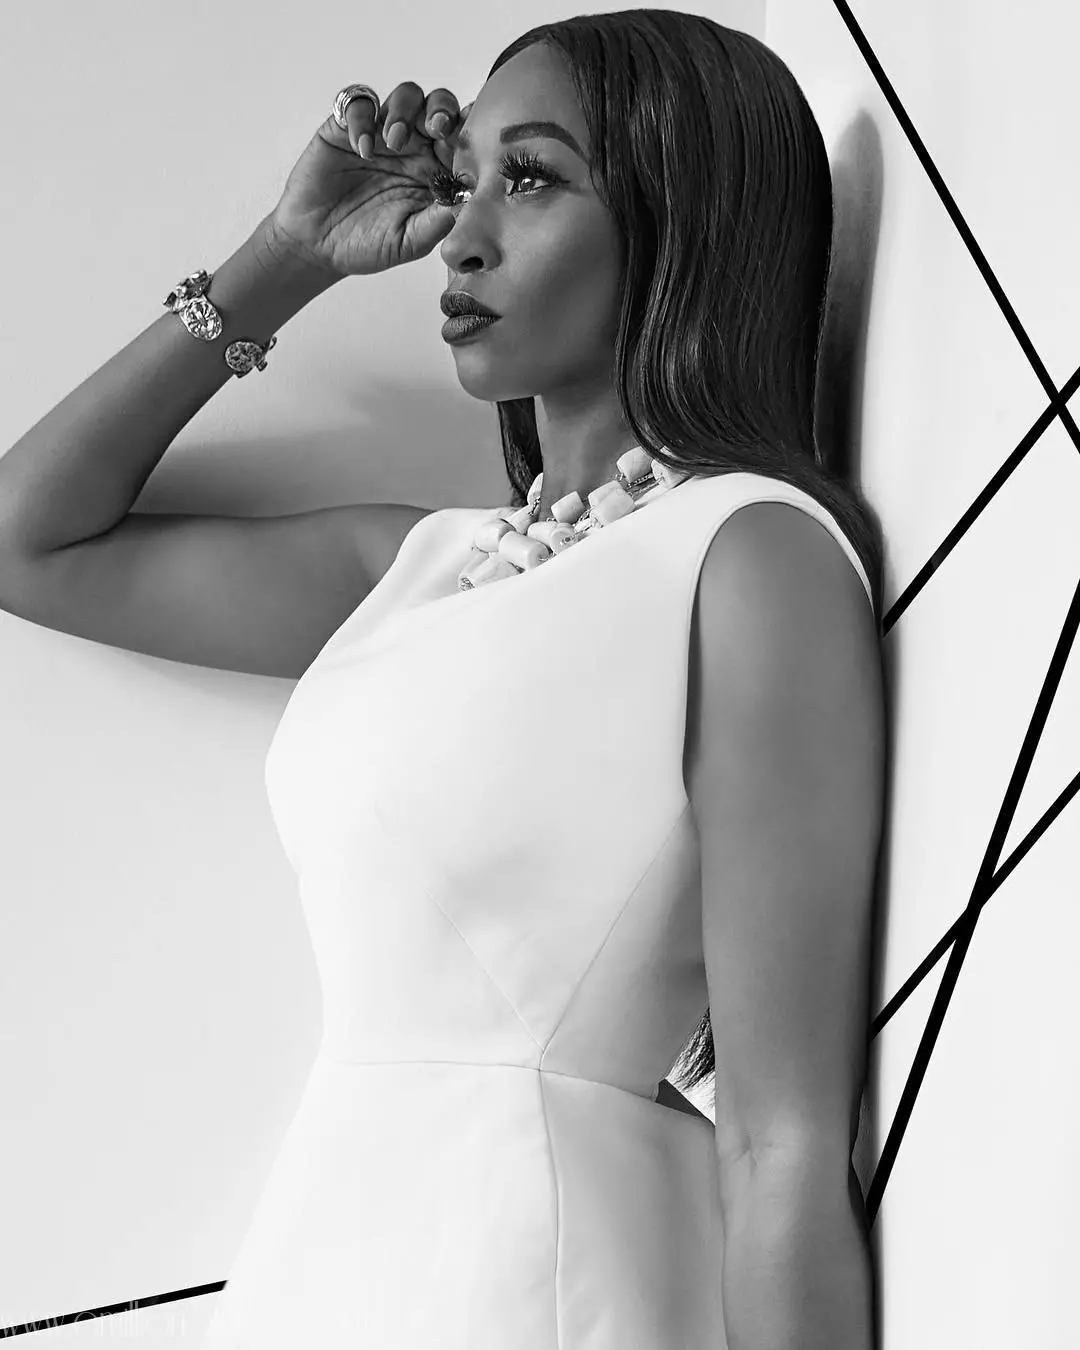 Veronica Odeka Stuns At Forty For ThisDay Style Magazine’s Latest Issue!